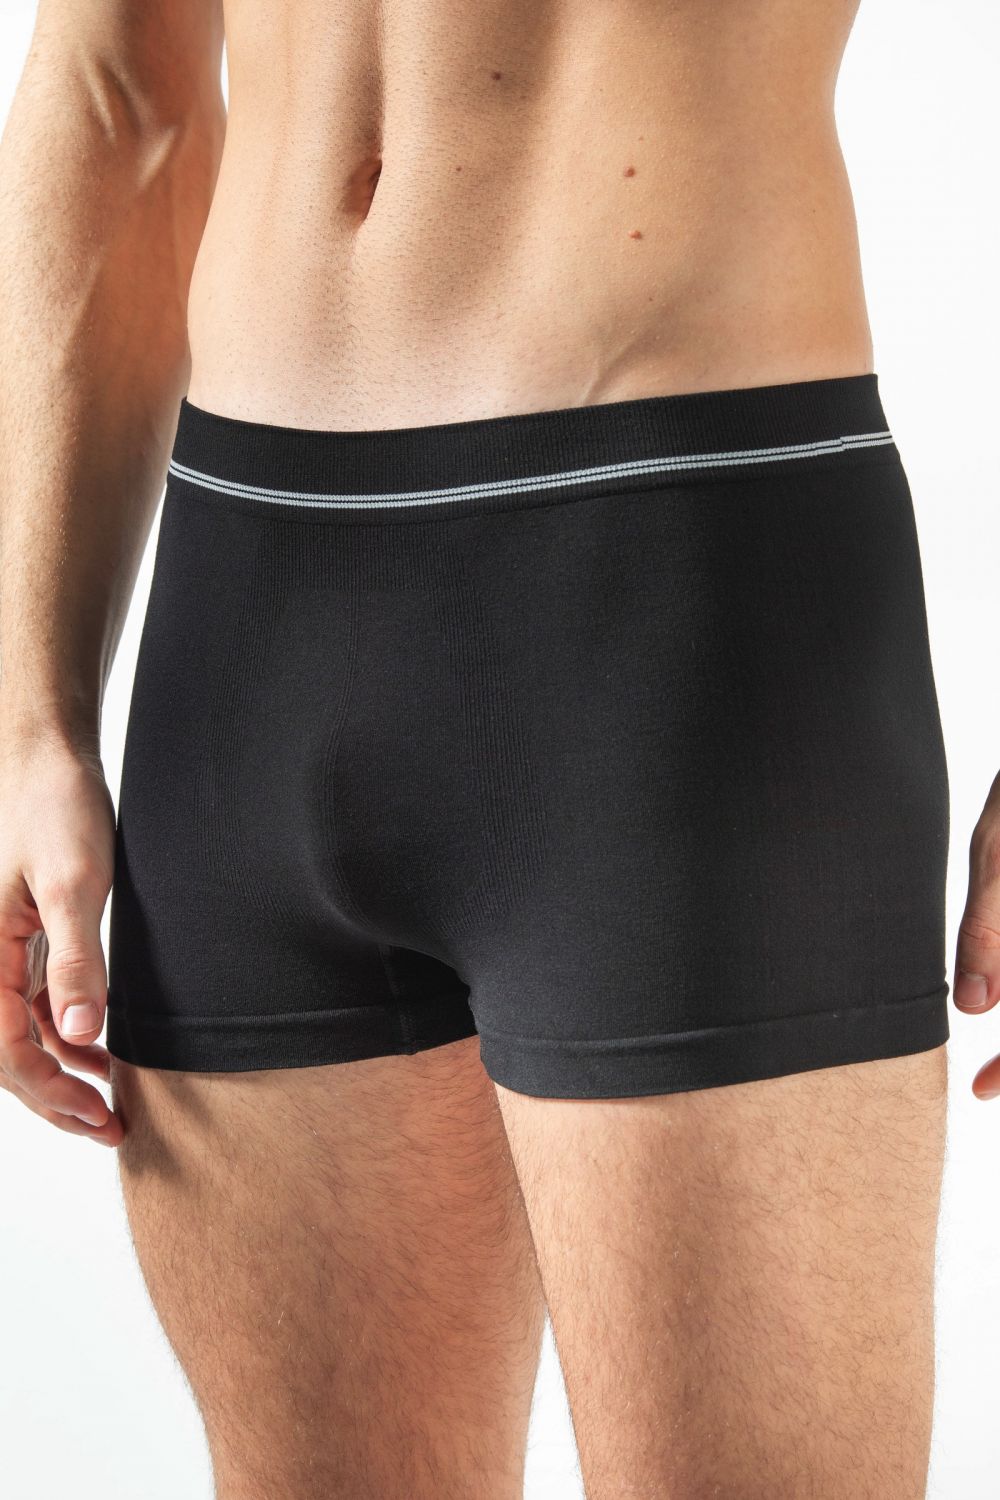 Soft Touch Bamboo Men's Boxers